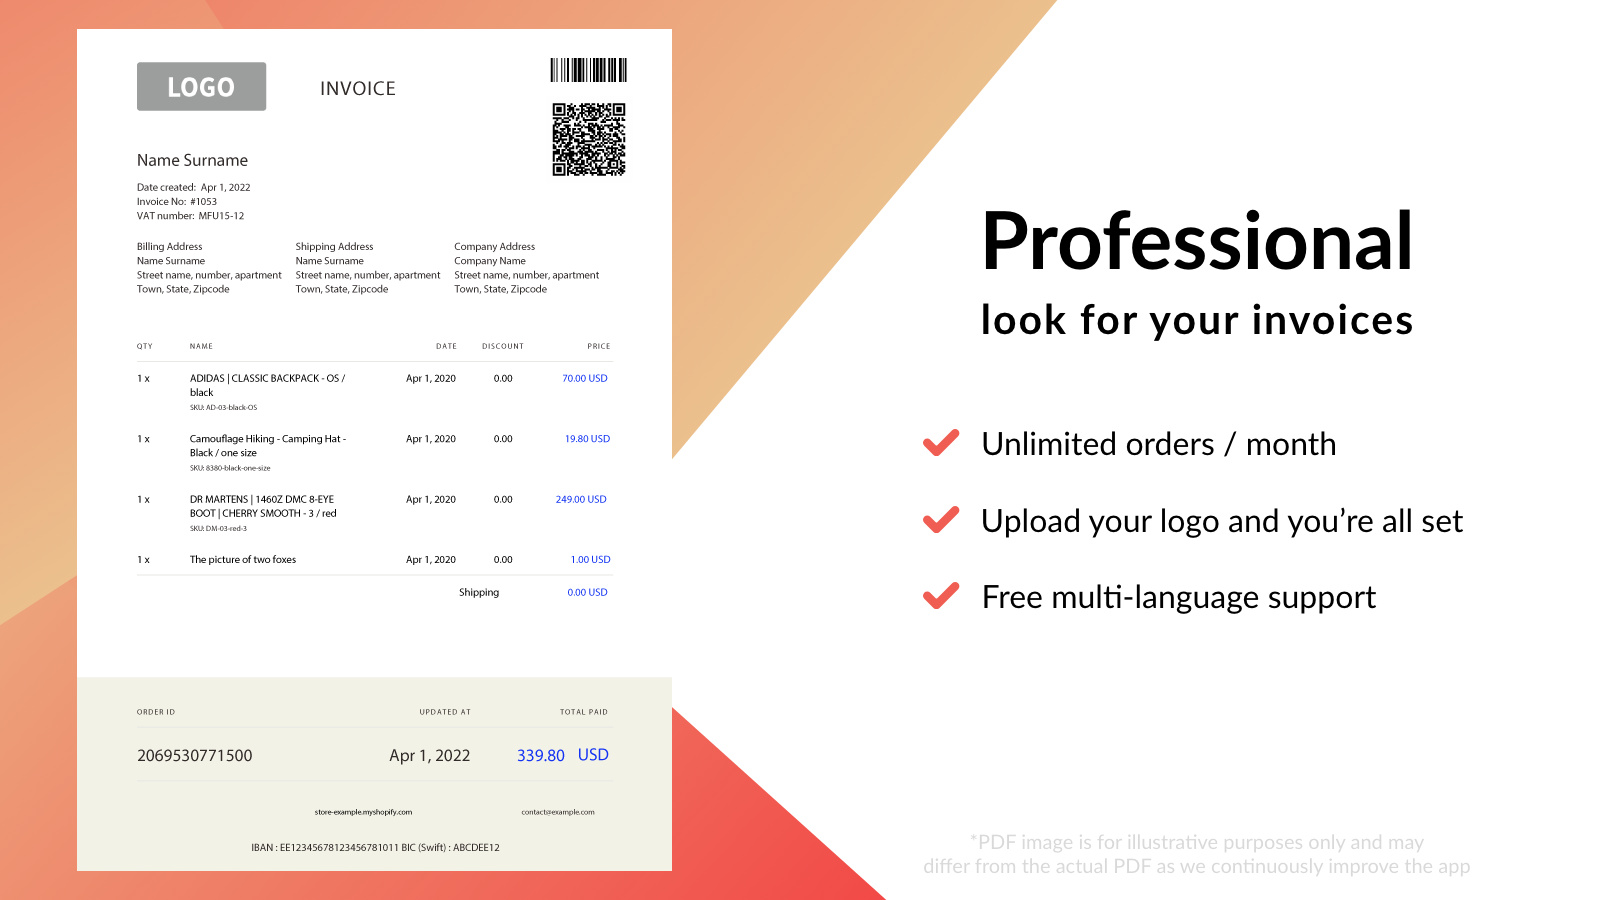 PDF Generator – professional looking invoices / receipts